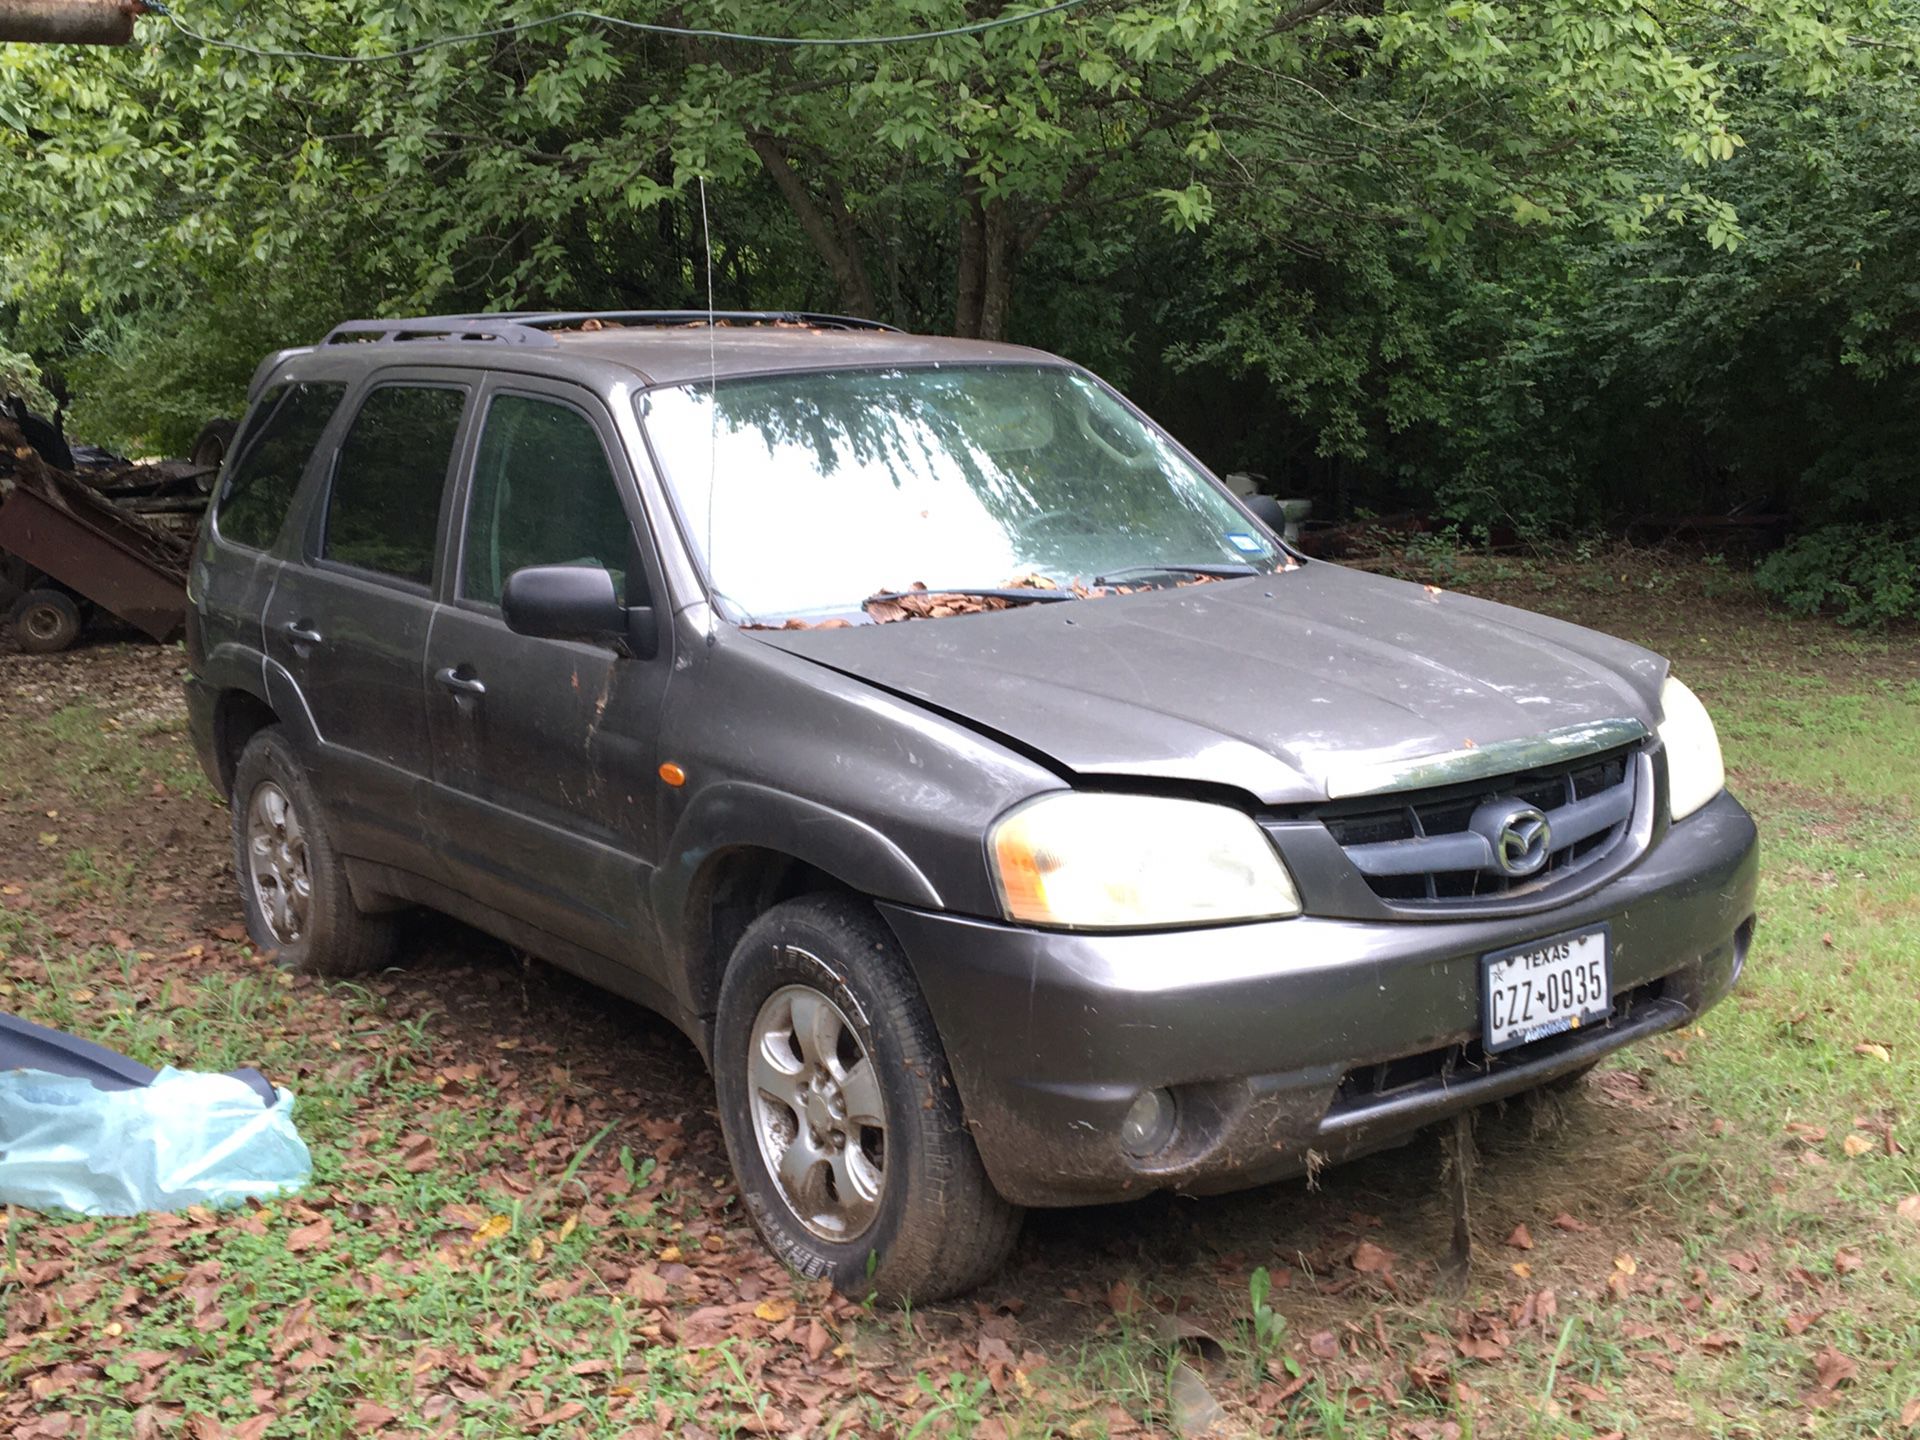 2004 Mazda Tribute duel overhead cams 24 valve v6 no title or key and don’t know much about it but it has been sitting for a little over a year 500 b